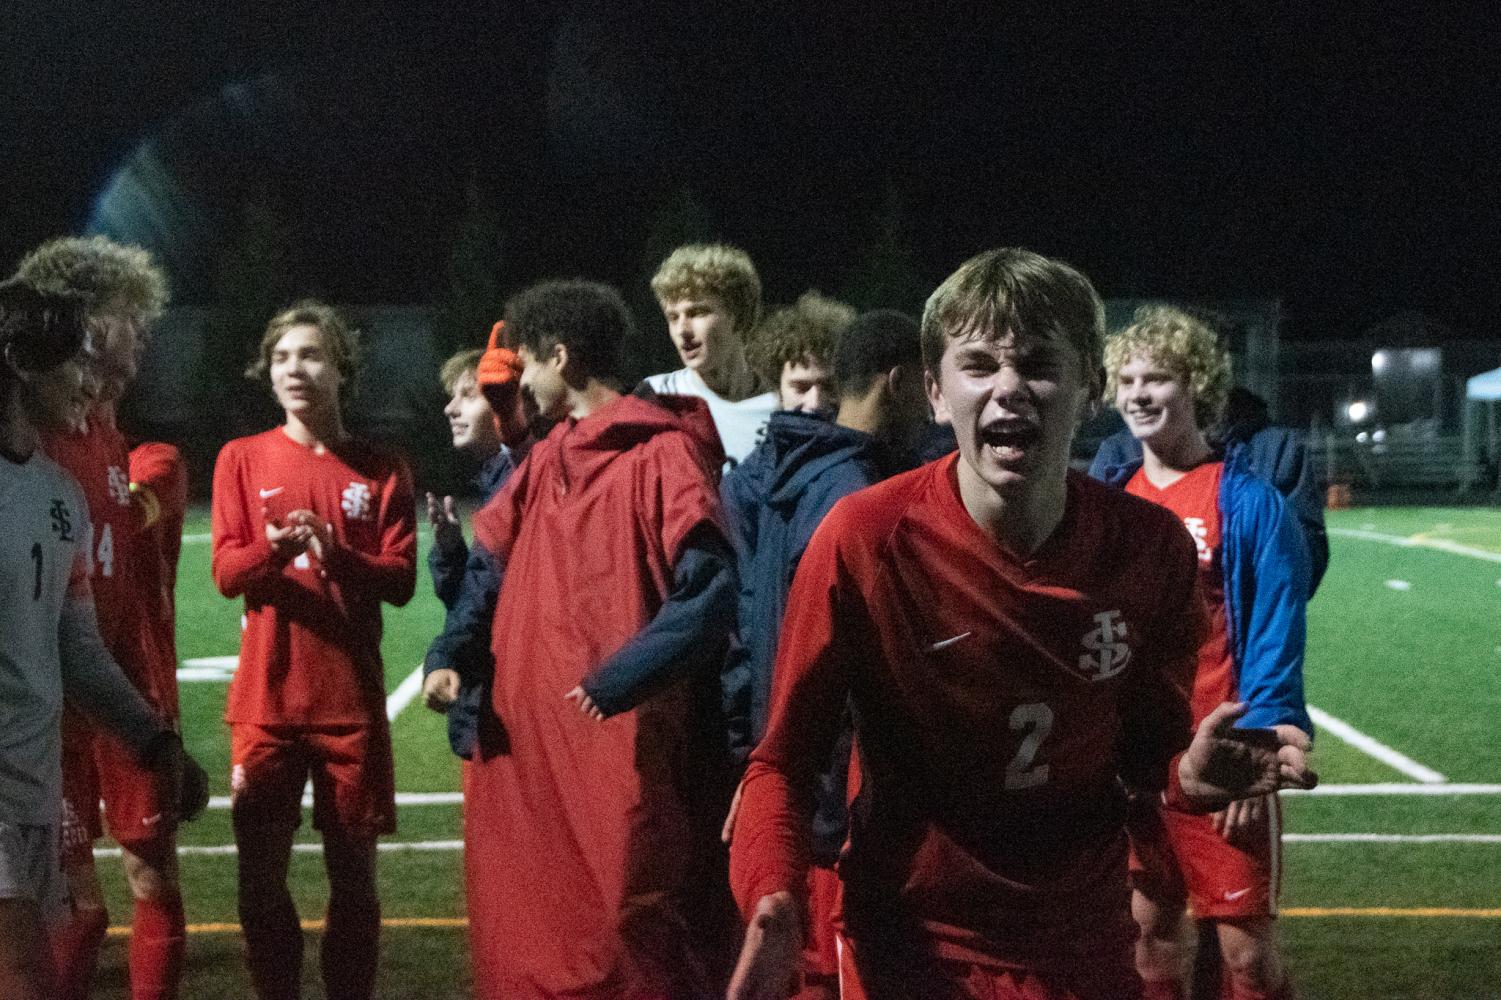 A+Ticket+to+Hillsboro+Stadium%3A+Boys+Soccer+Earns+Spot+in+State+Final